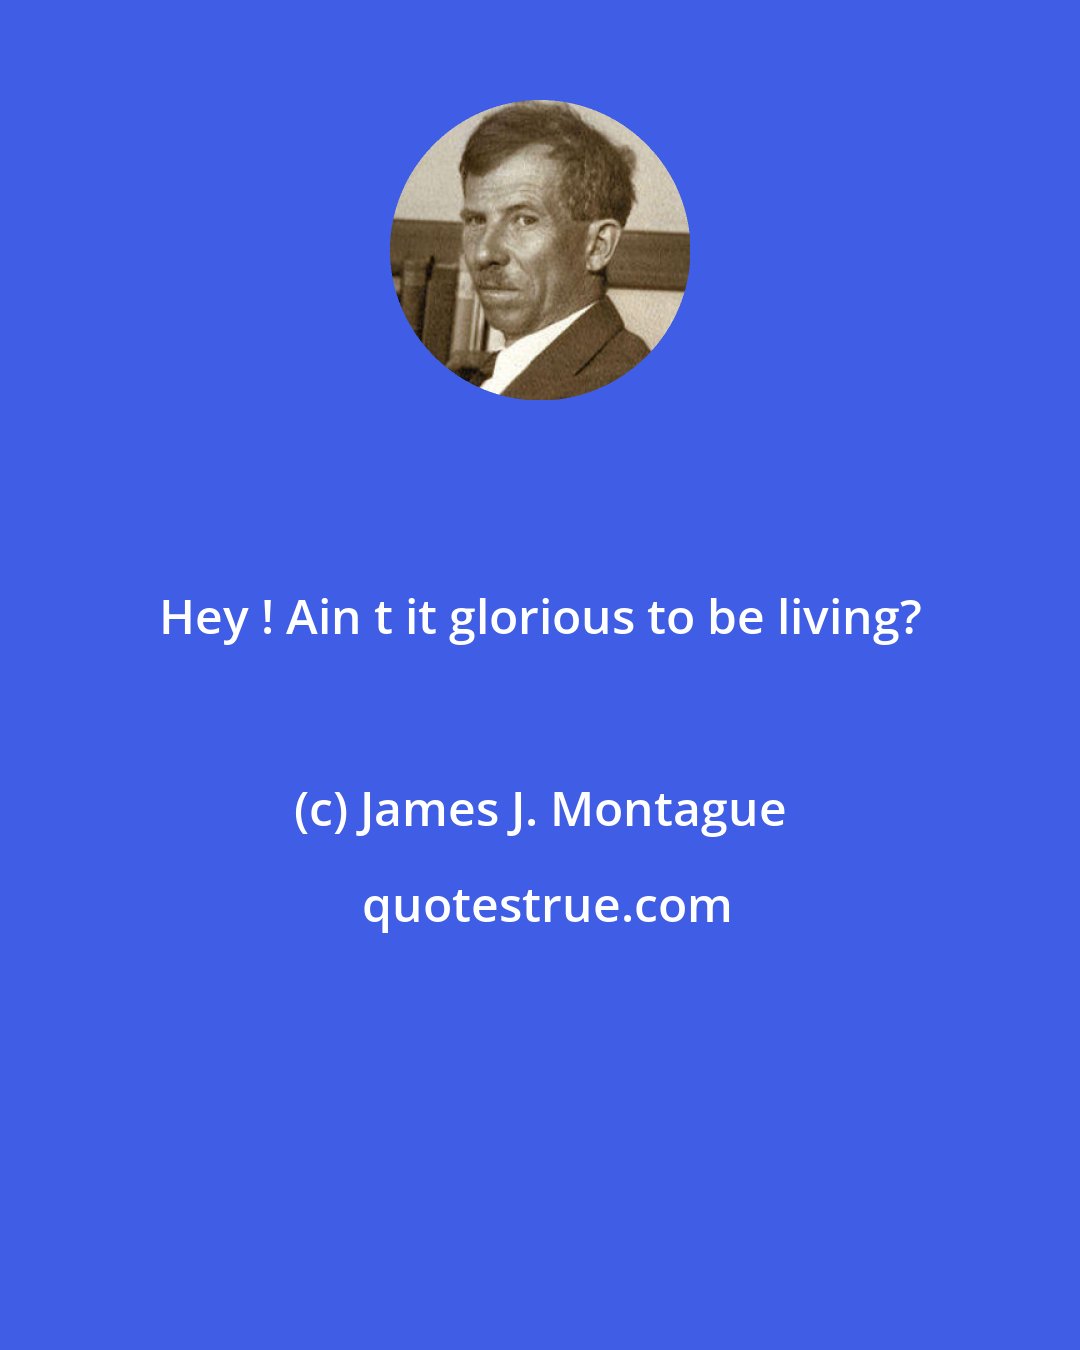 James J. Montague: Hey ! Ain t it glorious to be living?